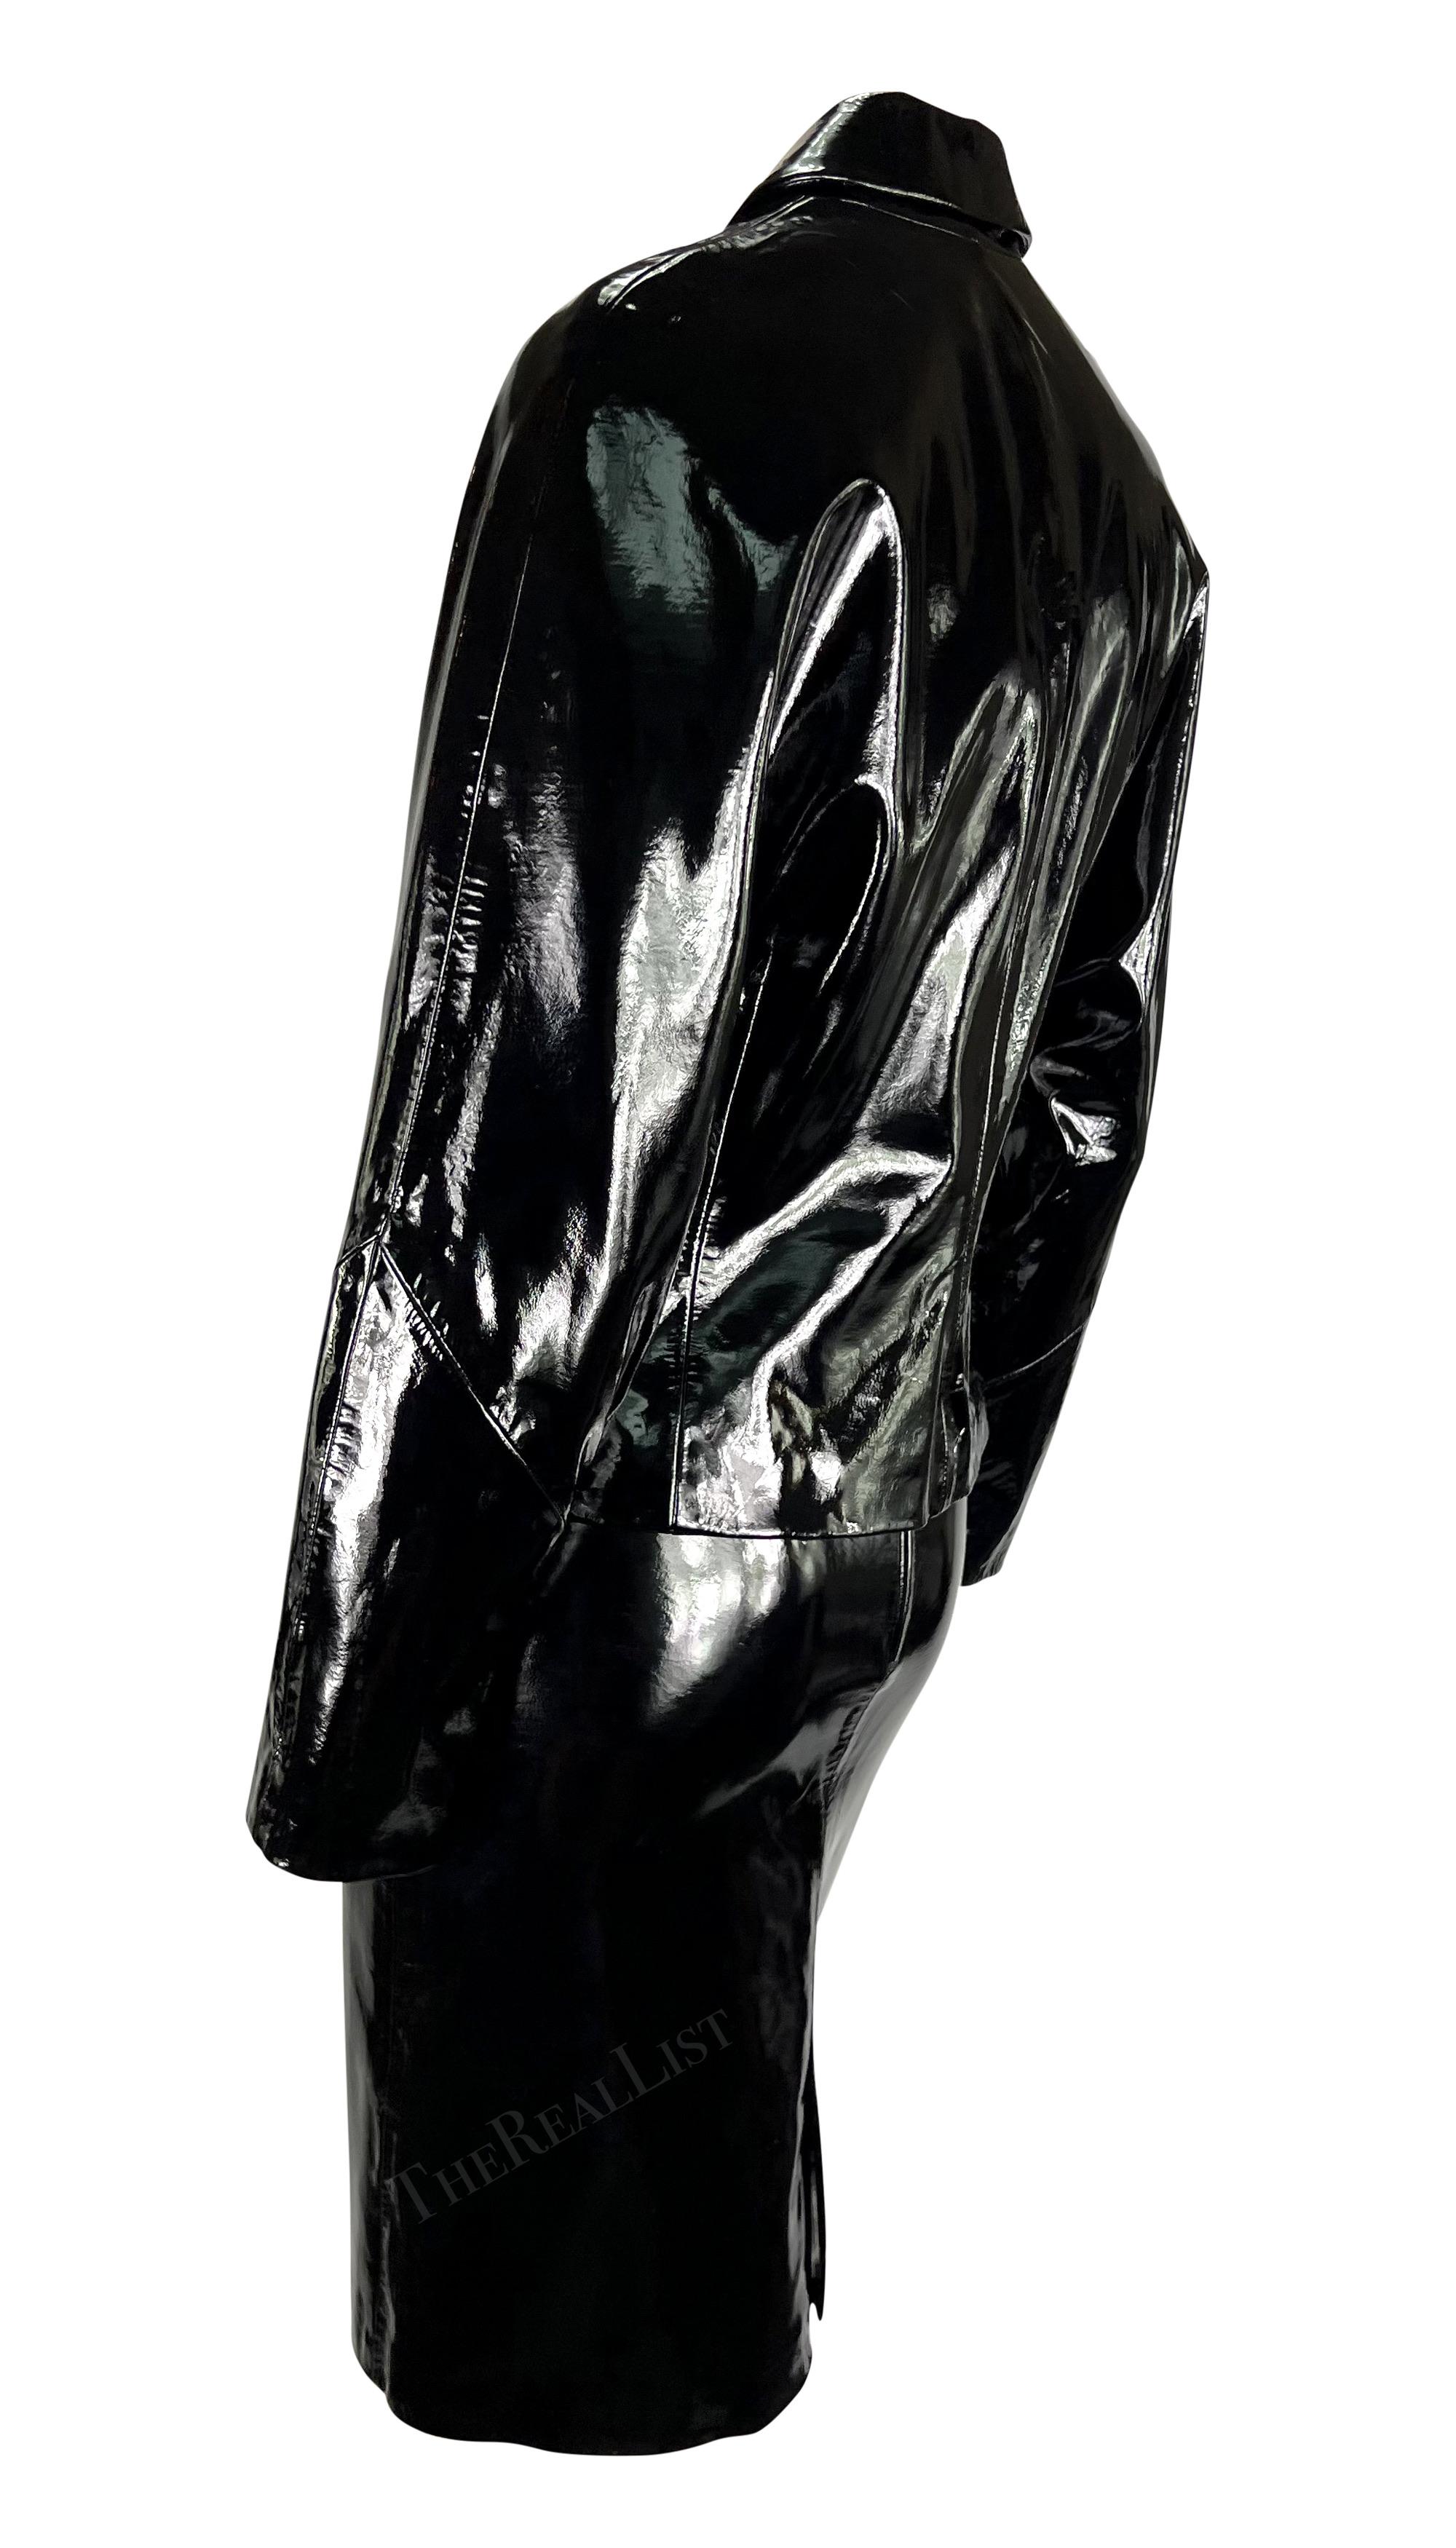 S/S 2001 Gianni Versace by Dontella Runway Black Patent Leather Moto Skirt Suit  5